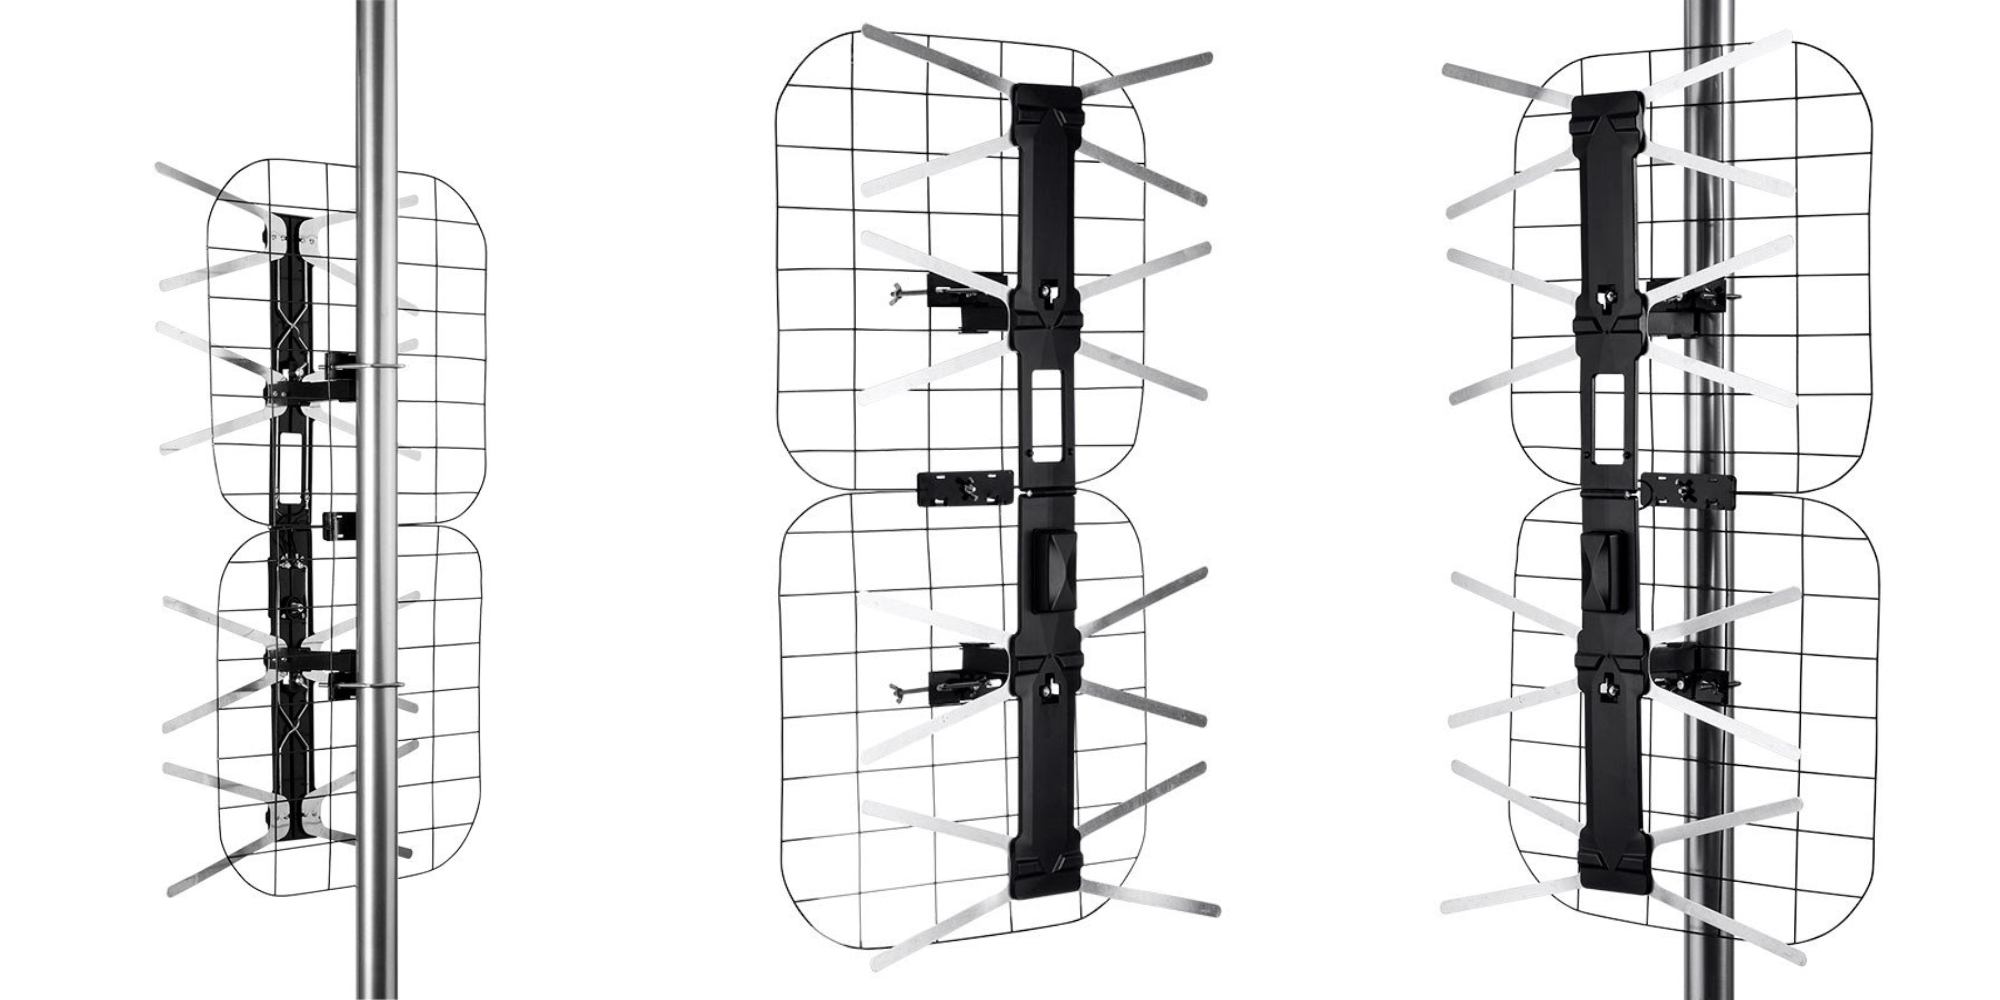 Monoprice's Outdoor HDTV Antenna drops to $20 + has an 80-mile range (20%  off)